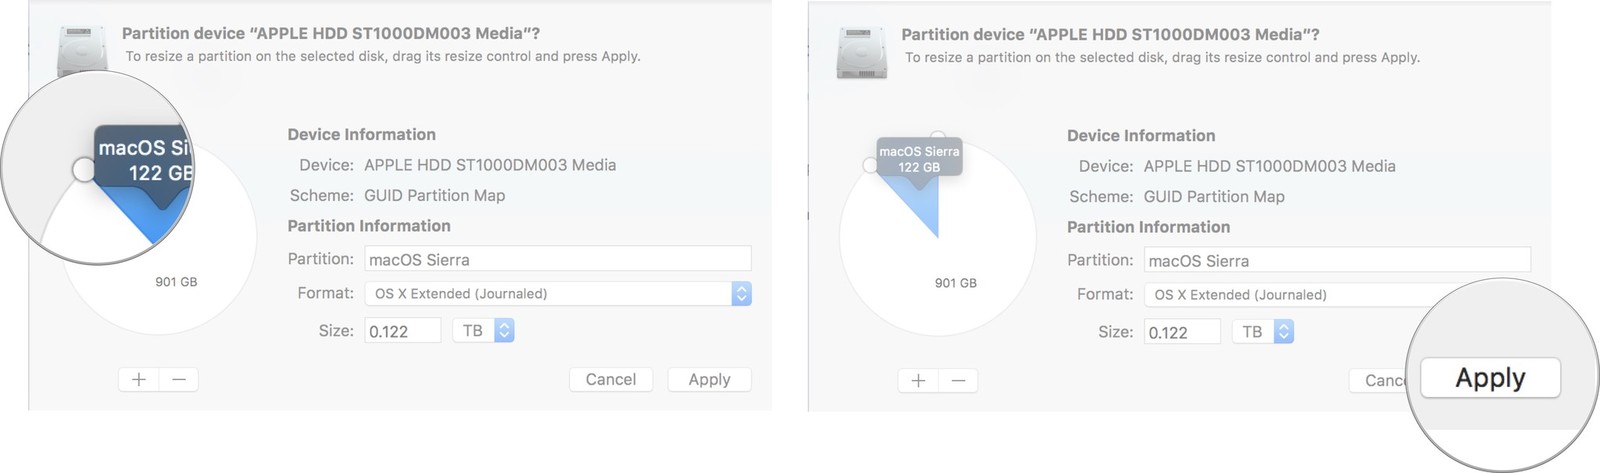 the partition bar will not let me drag it past 40gb for mac and windows